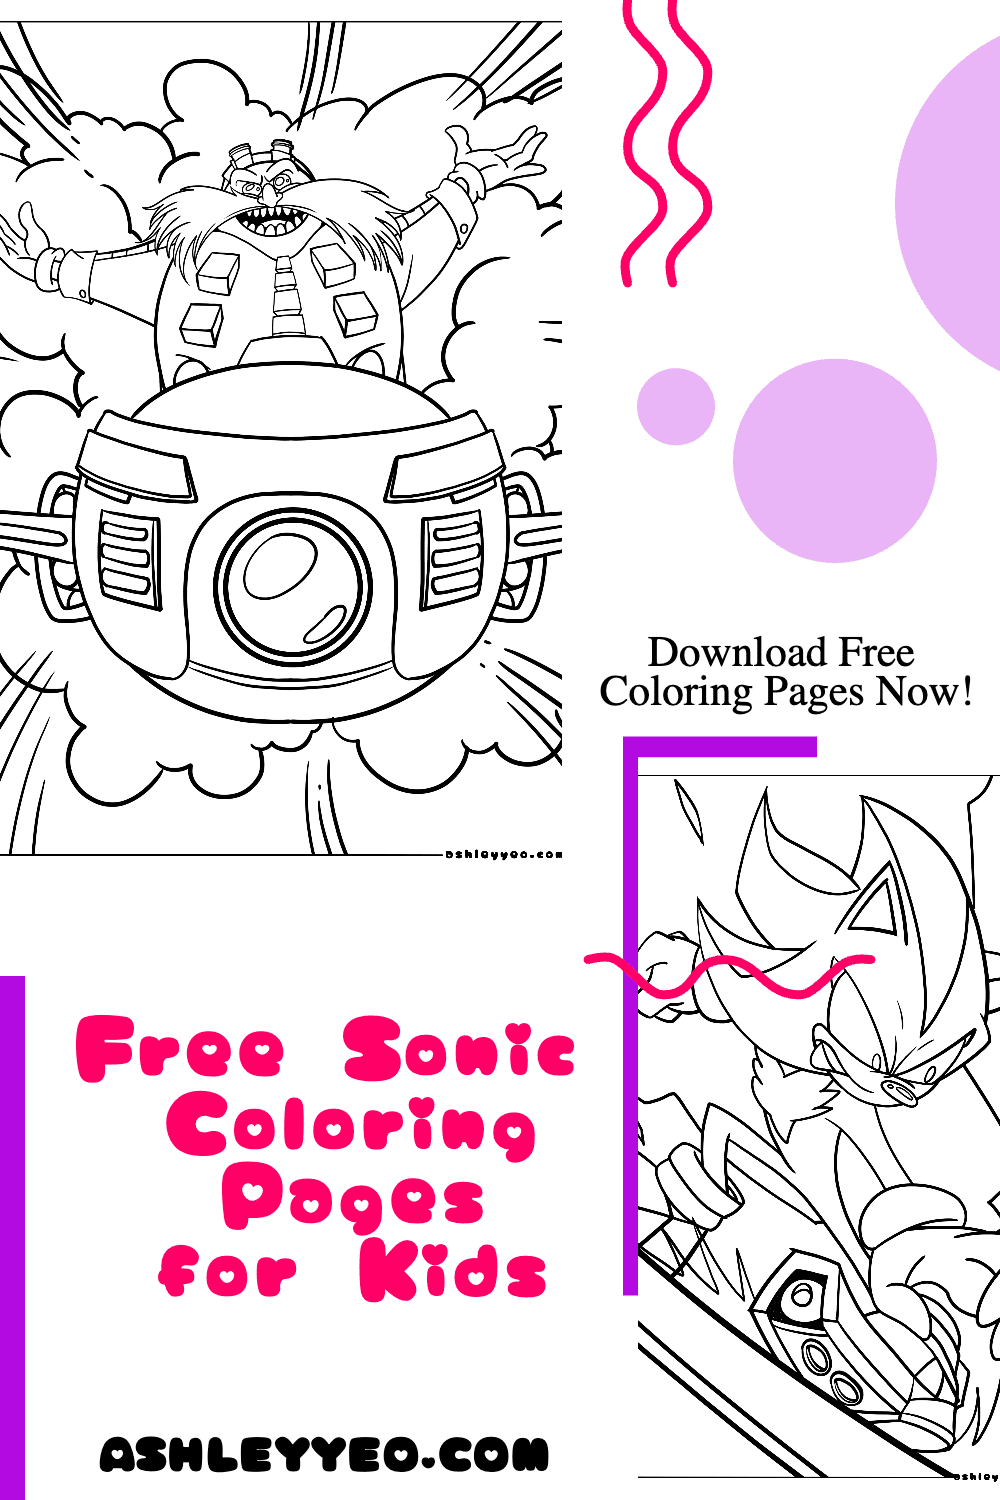 Sonic-Tails-Amy Rose-Knuckles free printable